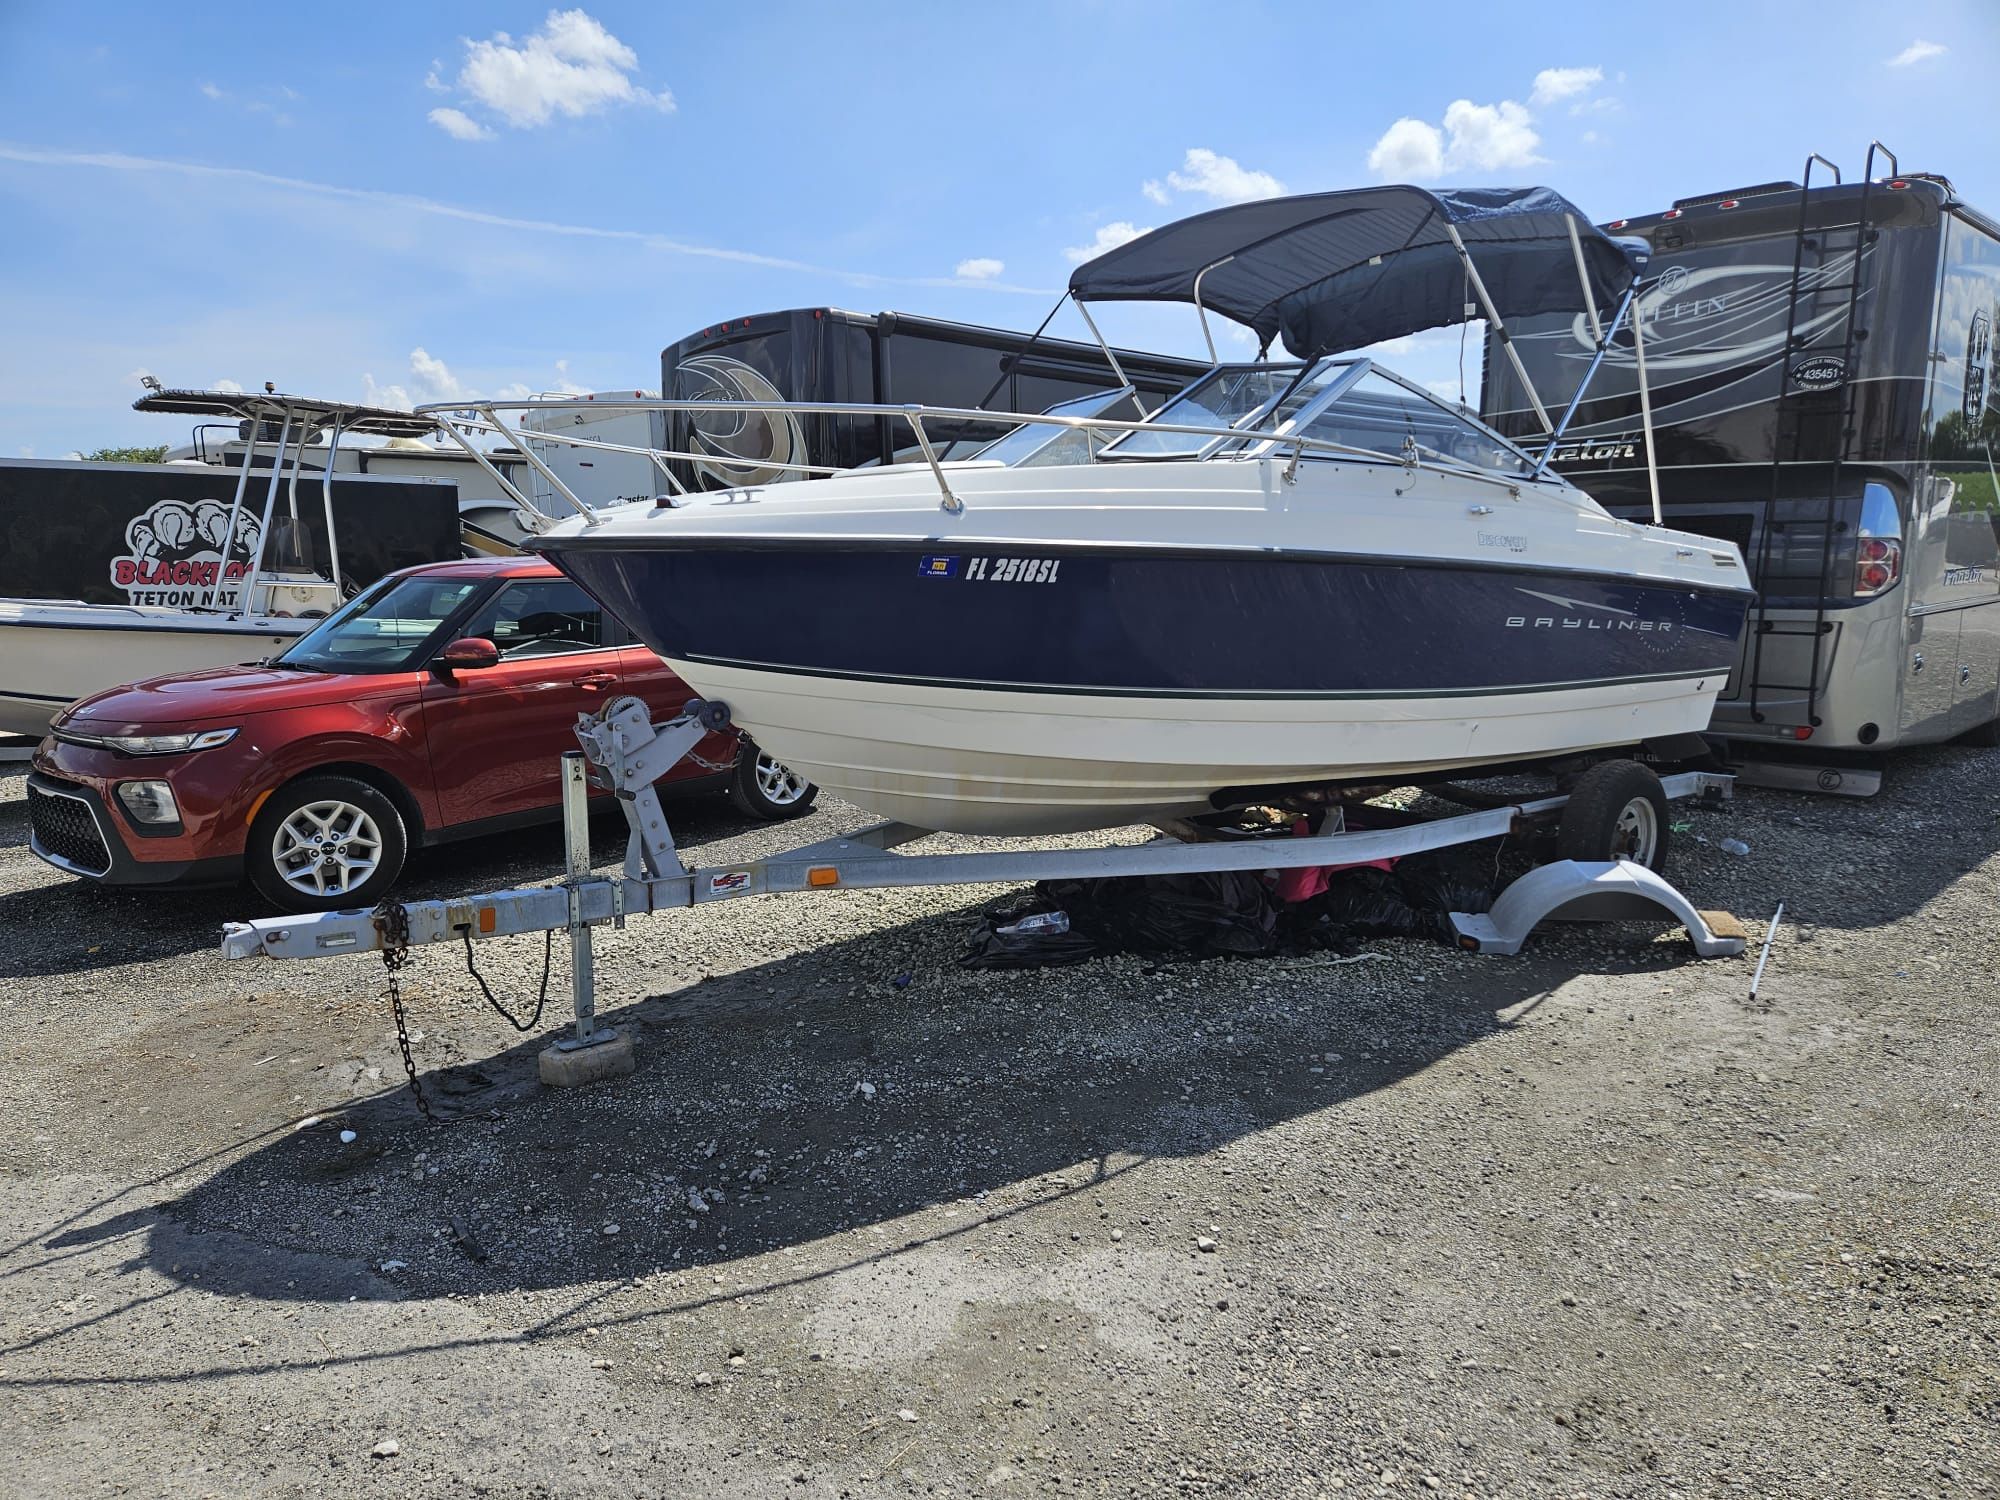 Bayliner 19 Ft Motivated Seller (As Is, Where Is)